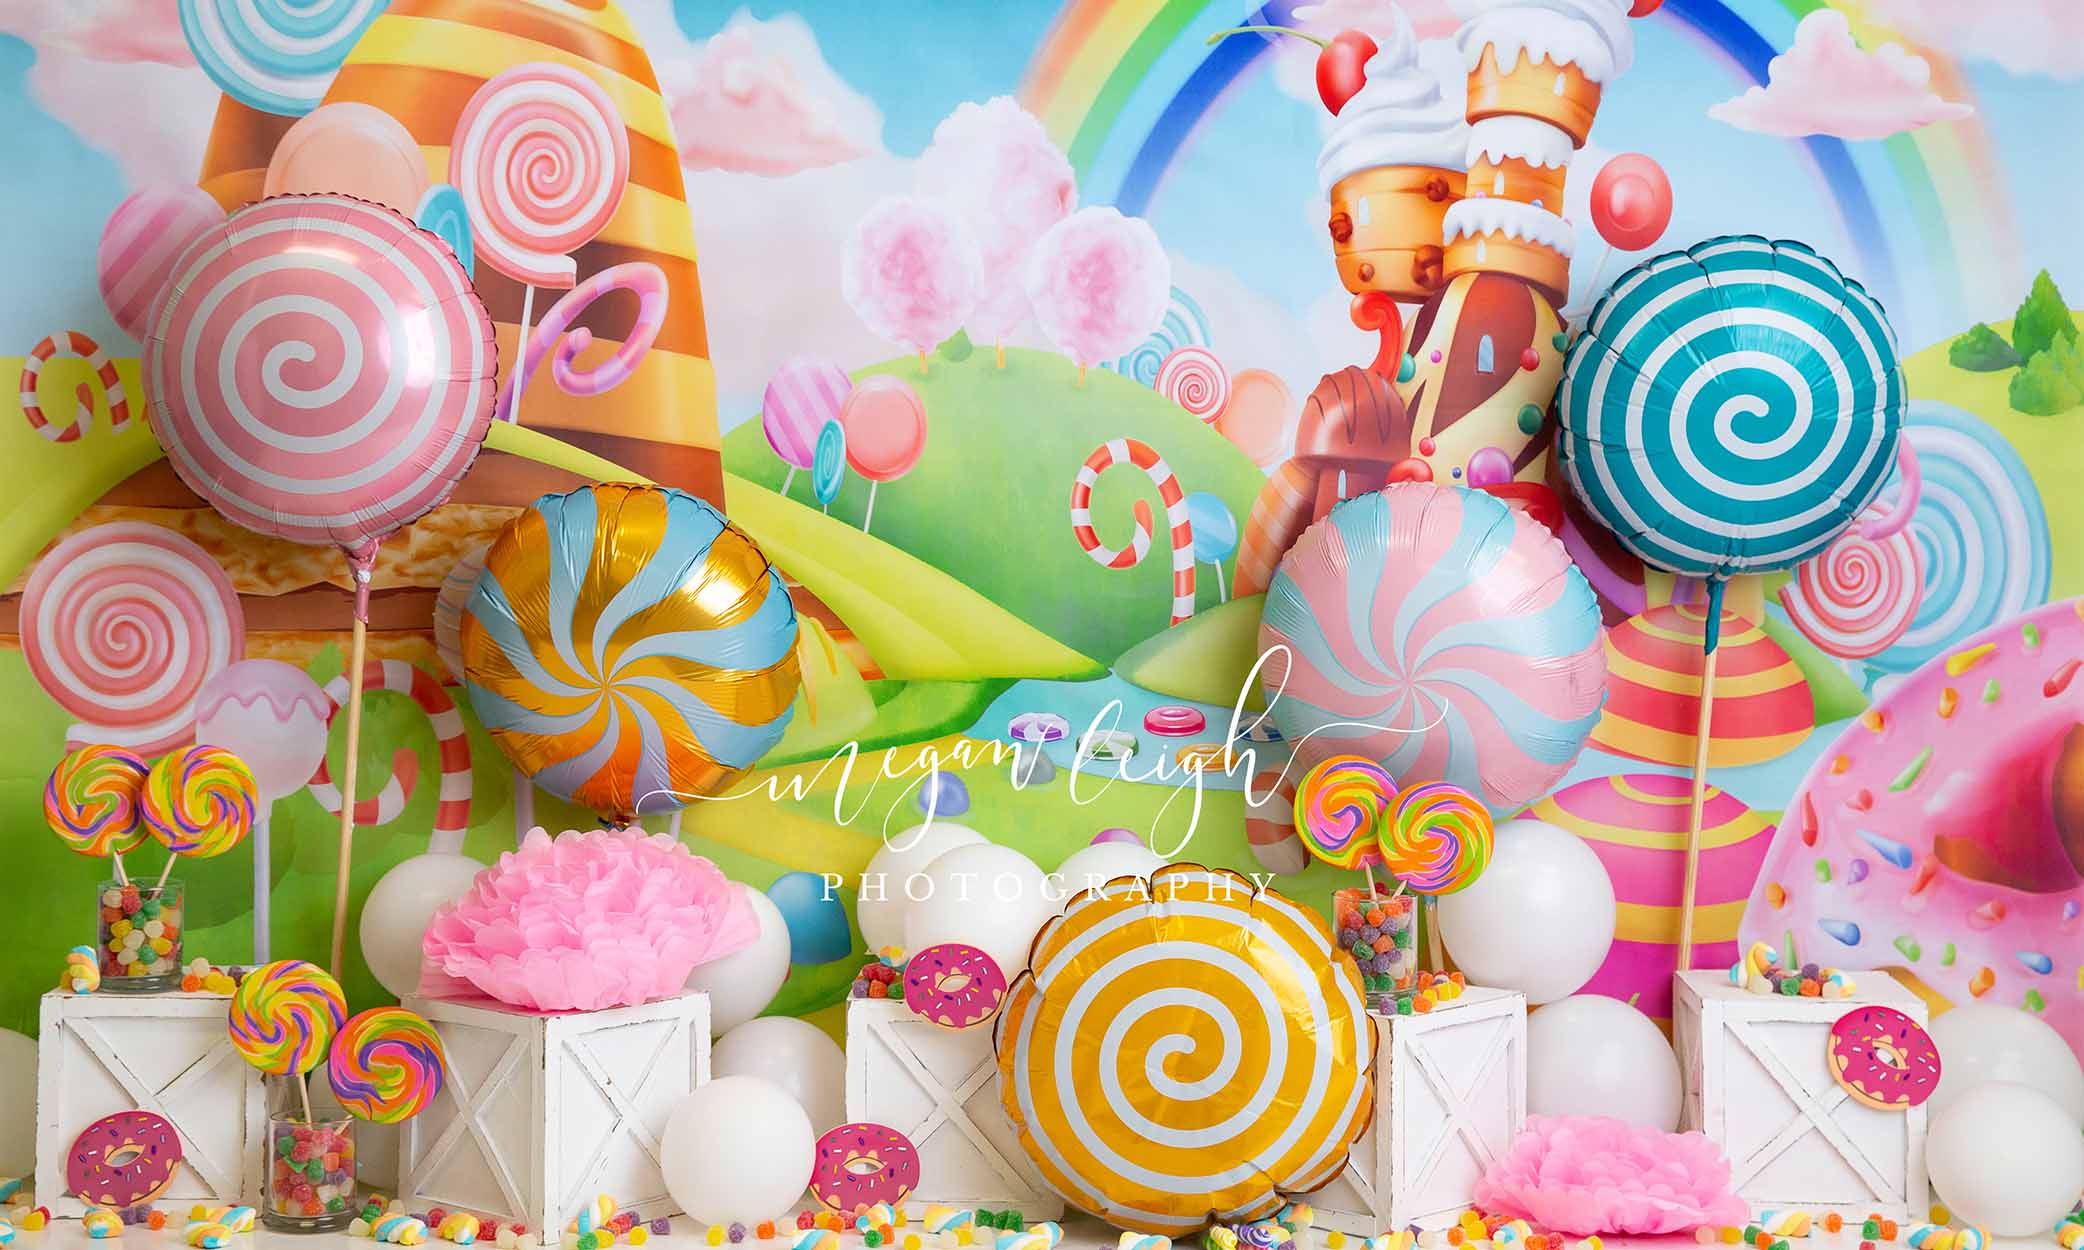 Kate sweets treats Backdrop Cake Smash Designed by Megan Leigh Photography